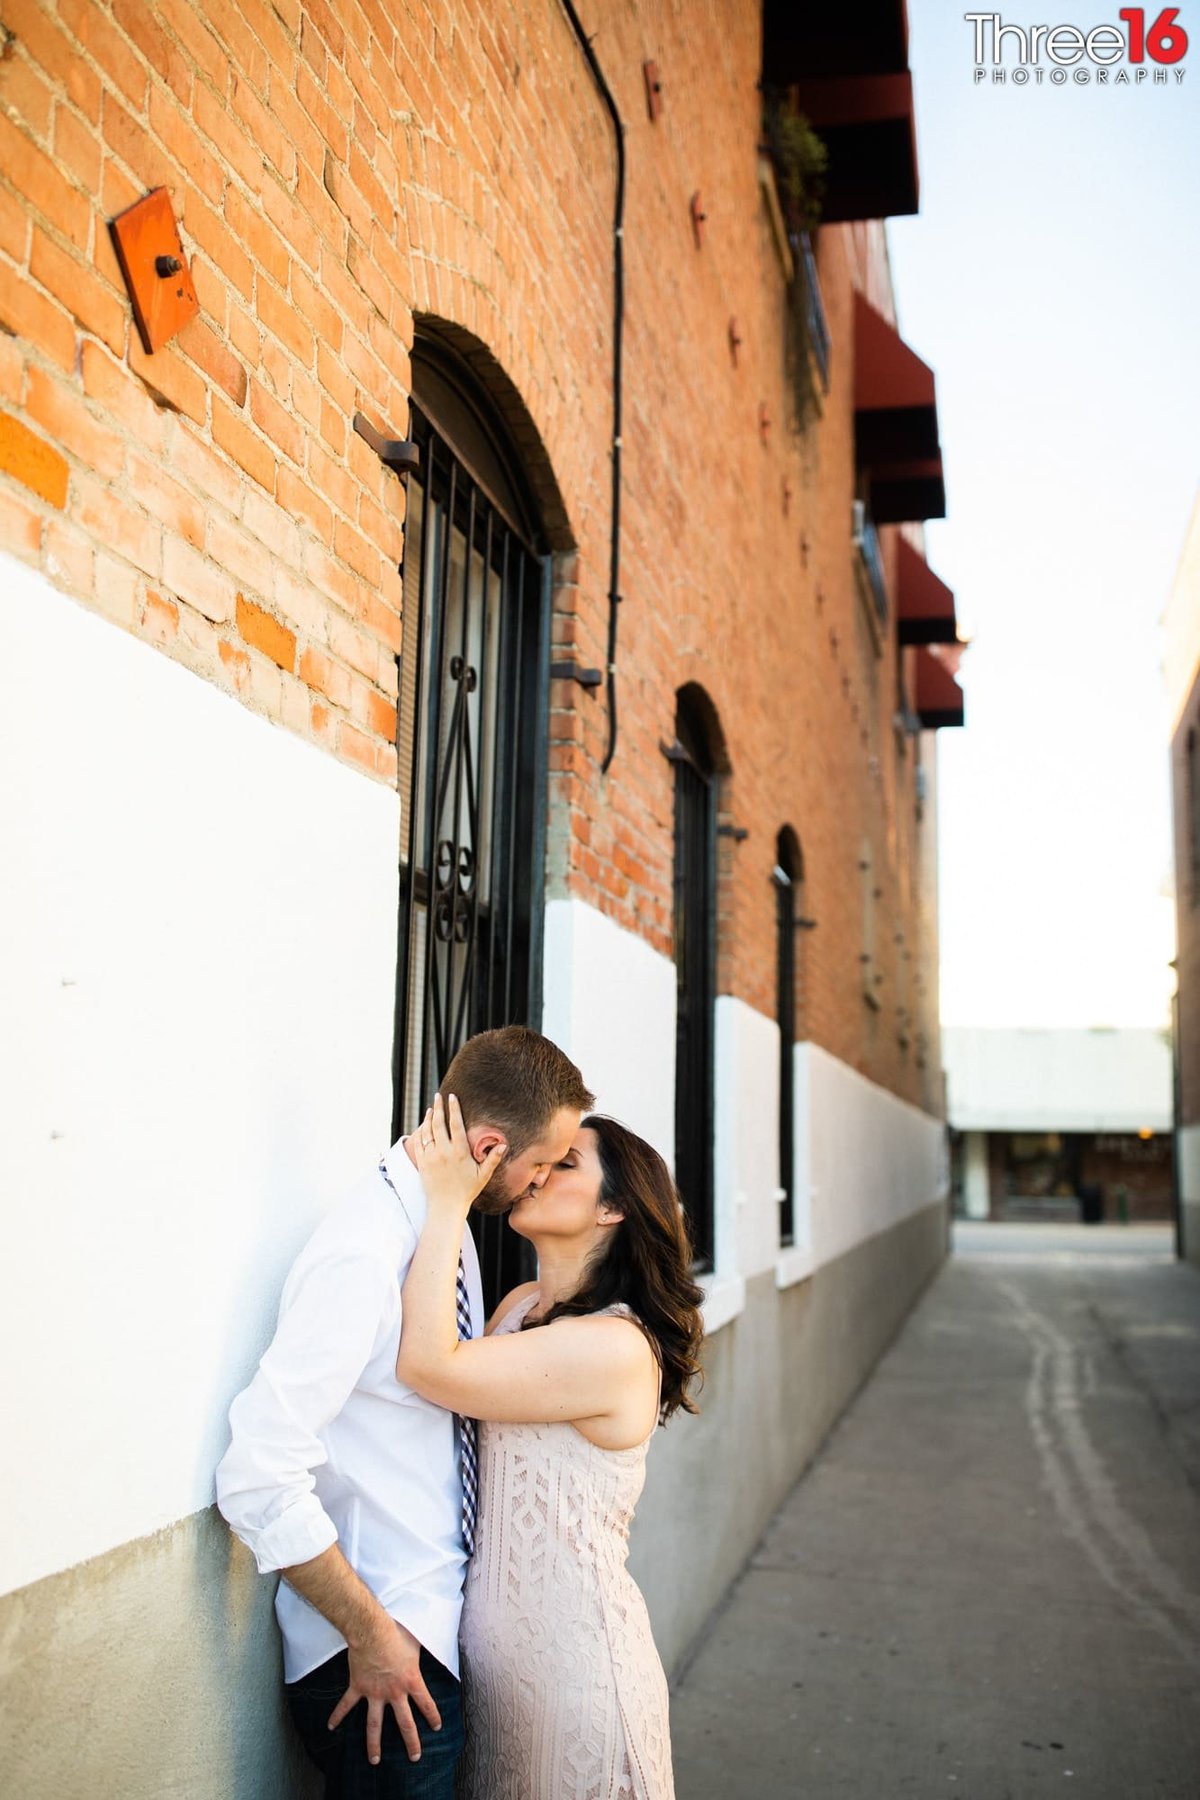 Bride to be kisses her Groom as he is up against a wall in an alleyway